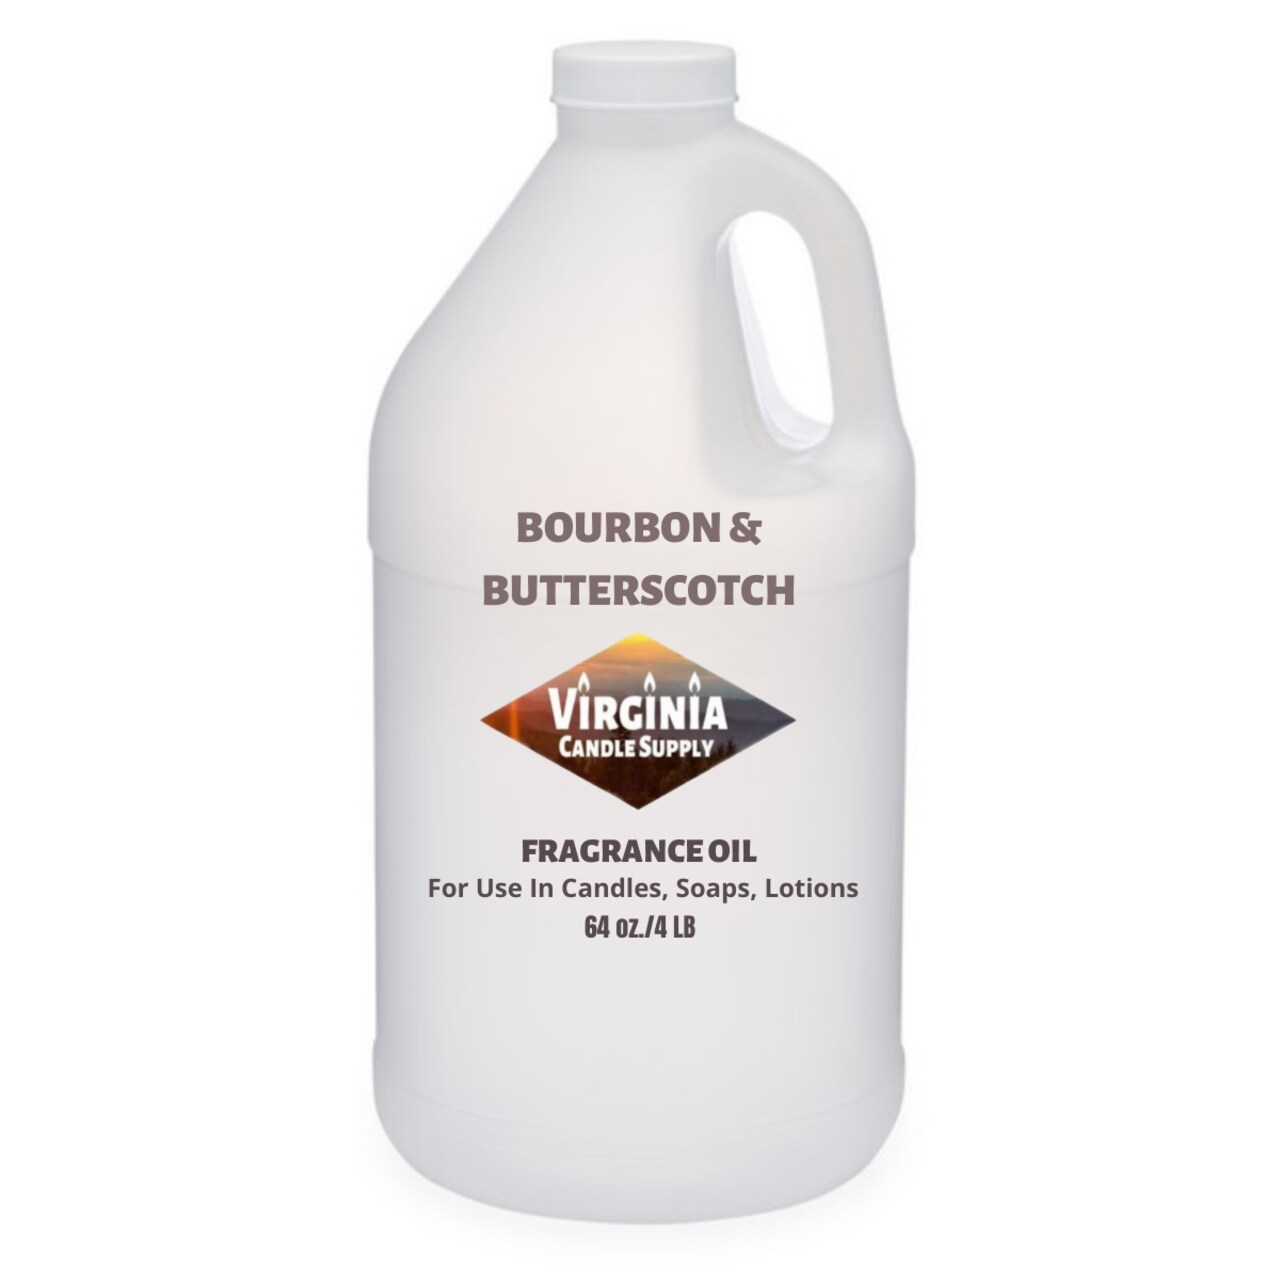 Bourbon &#x26; Butterscotch Fragrance Oil (Our Version of the Brand Name) (64 oz Jug) for Candle Making, Soap Making, Tart Making, Room Sprays, Lotions, Car Fresheners, Slime, Bath Bombs, Warmers&#x2026;